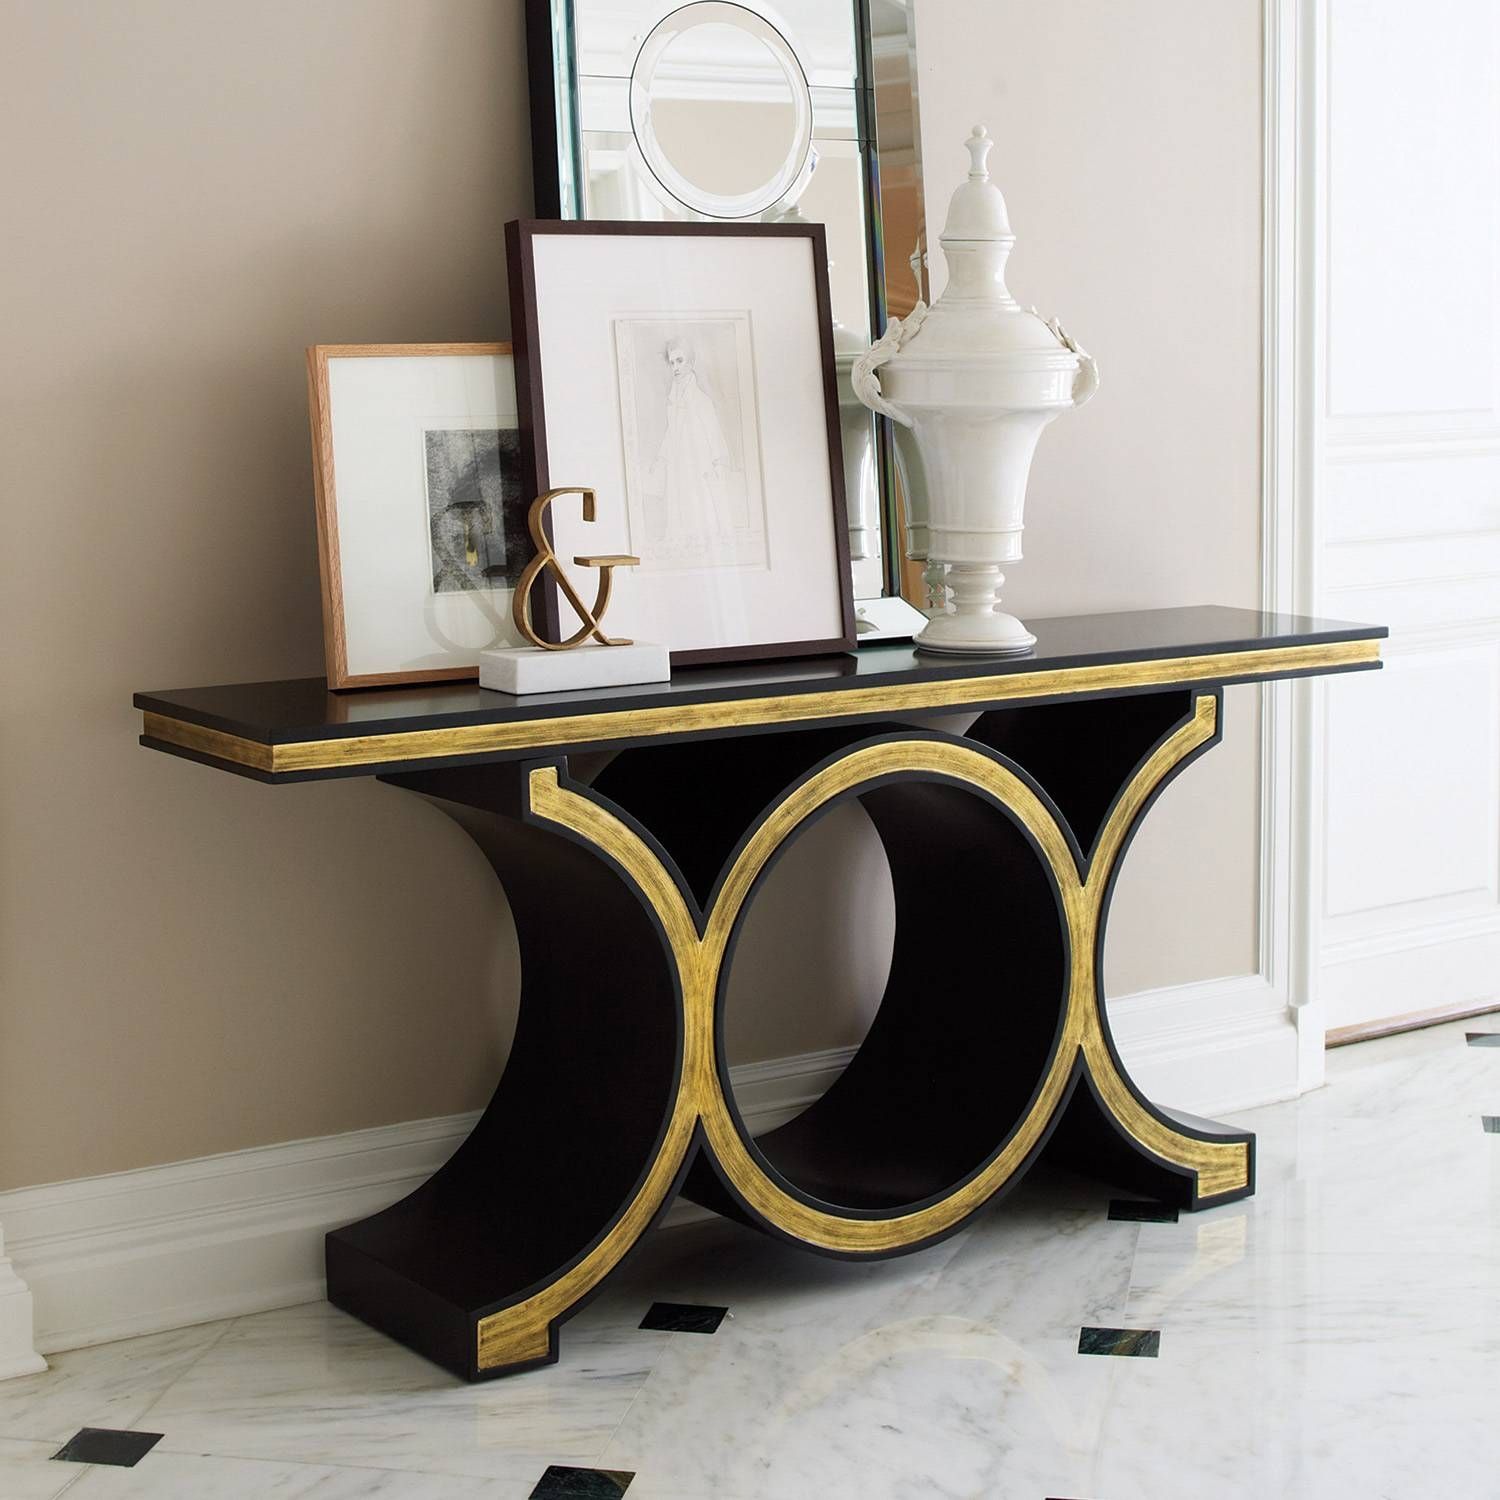 Modern Console Table With Mirror – Harpsounds (View 13 of 25)